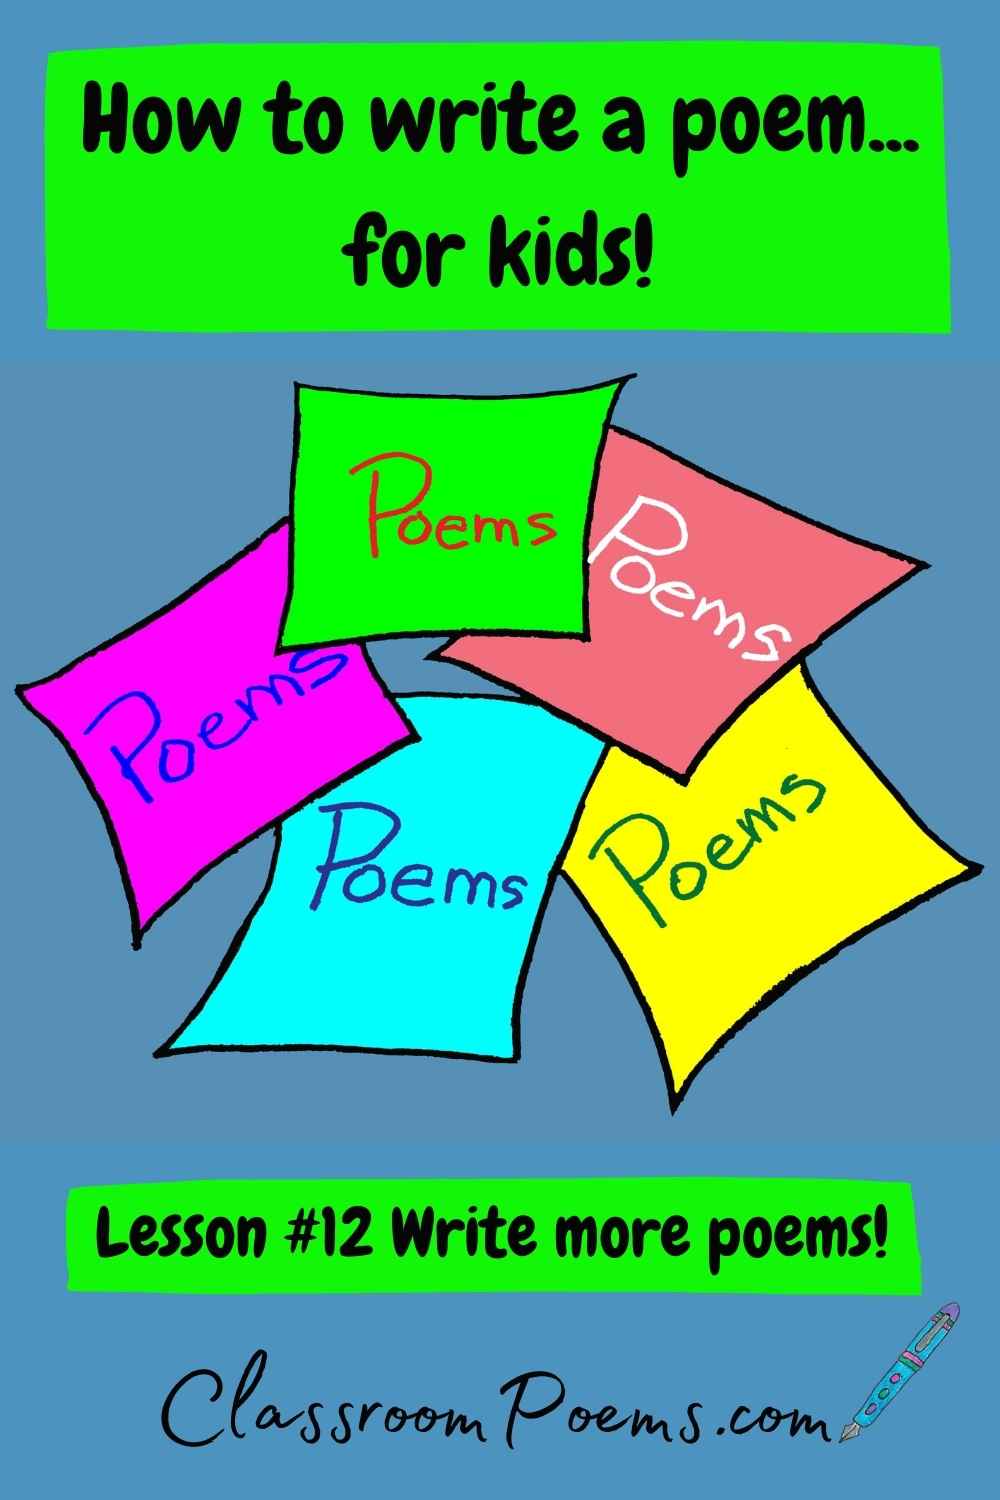 How to teach poetry to kids. Write more poems.